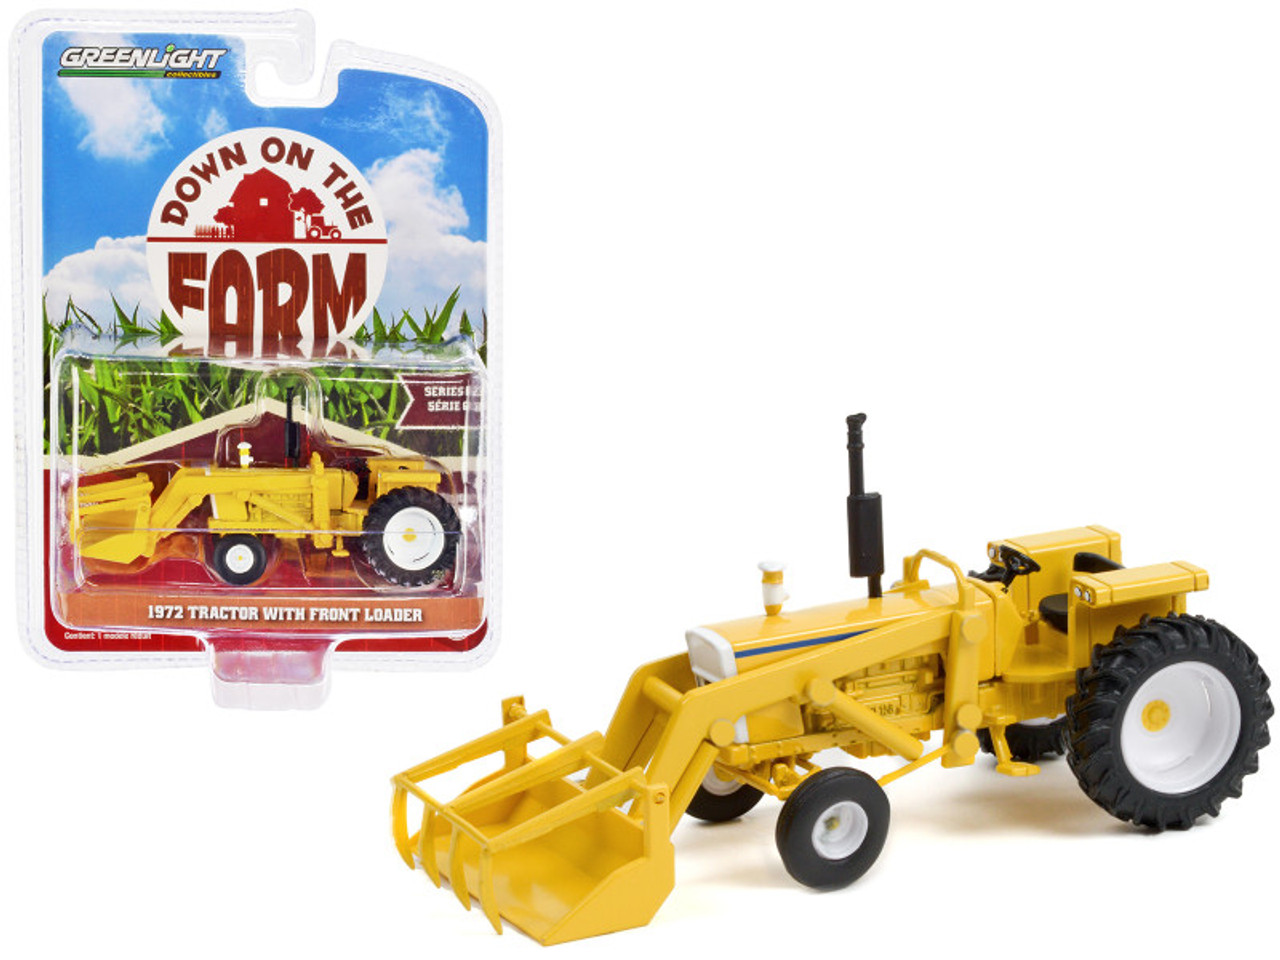 1972 Tractor with Front Loader Yellow "Down on the Farm" Series 6 1/64 Diecast Model by Greenlight